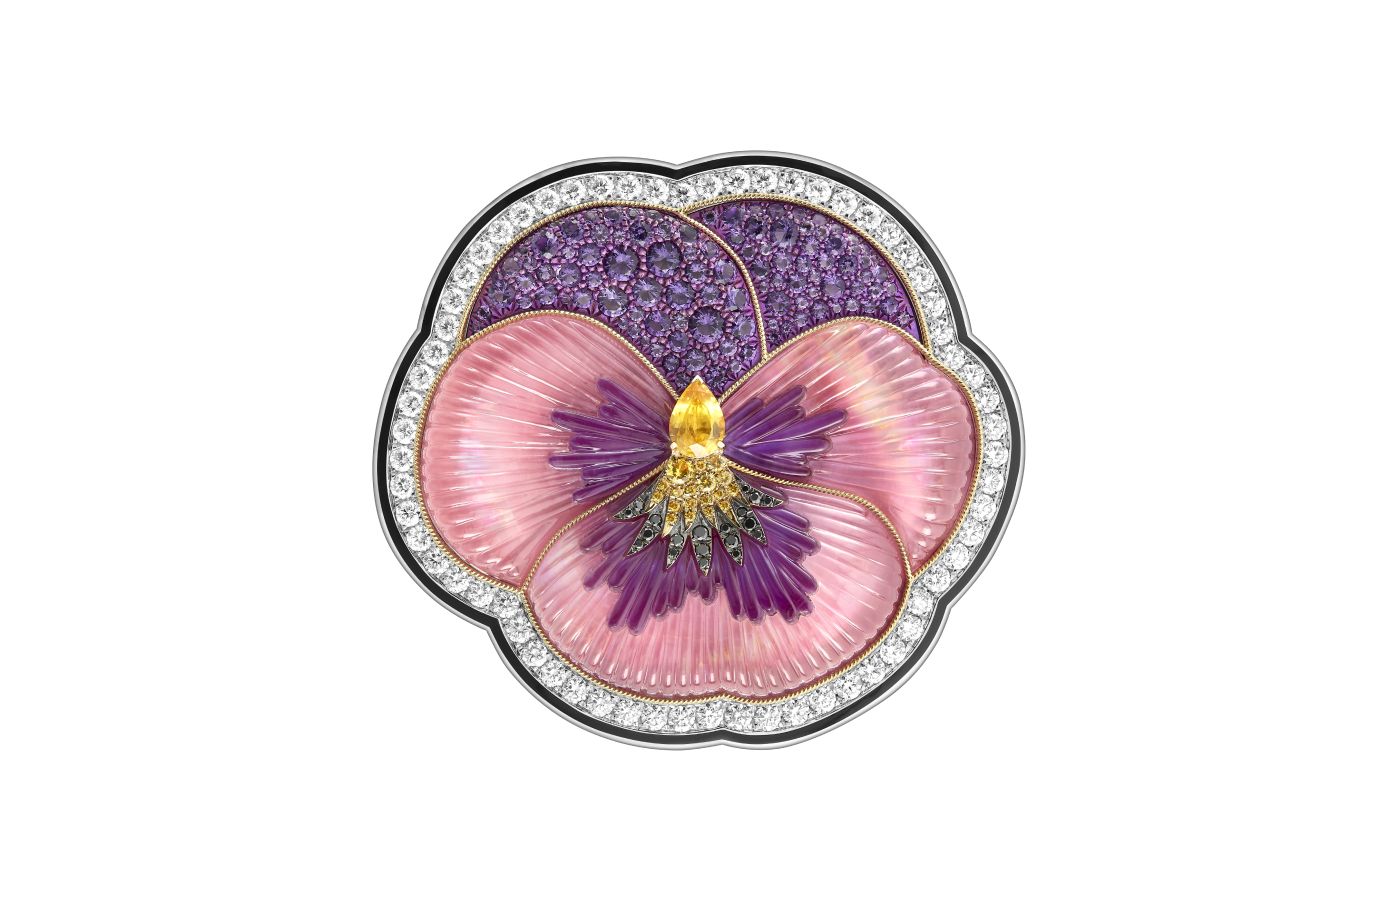 Boucheron Do Not Iron! Pansy brooch with a 0.84 carat yellow sapphire, pink quartz, mother of pearl, diamonds, yellow sapphires, amethysts and rhodolites, decorated with lacquer in white and yellow gold and titanium, from the More is More High Jewellery collection 